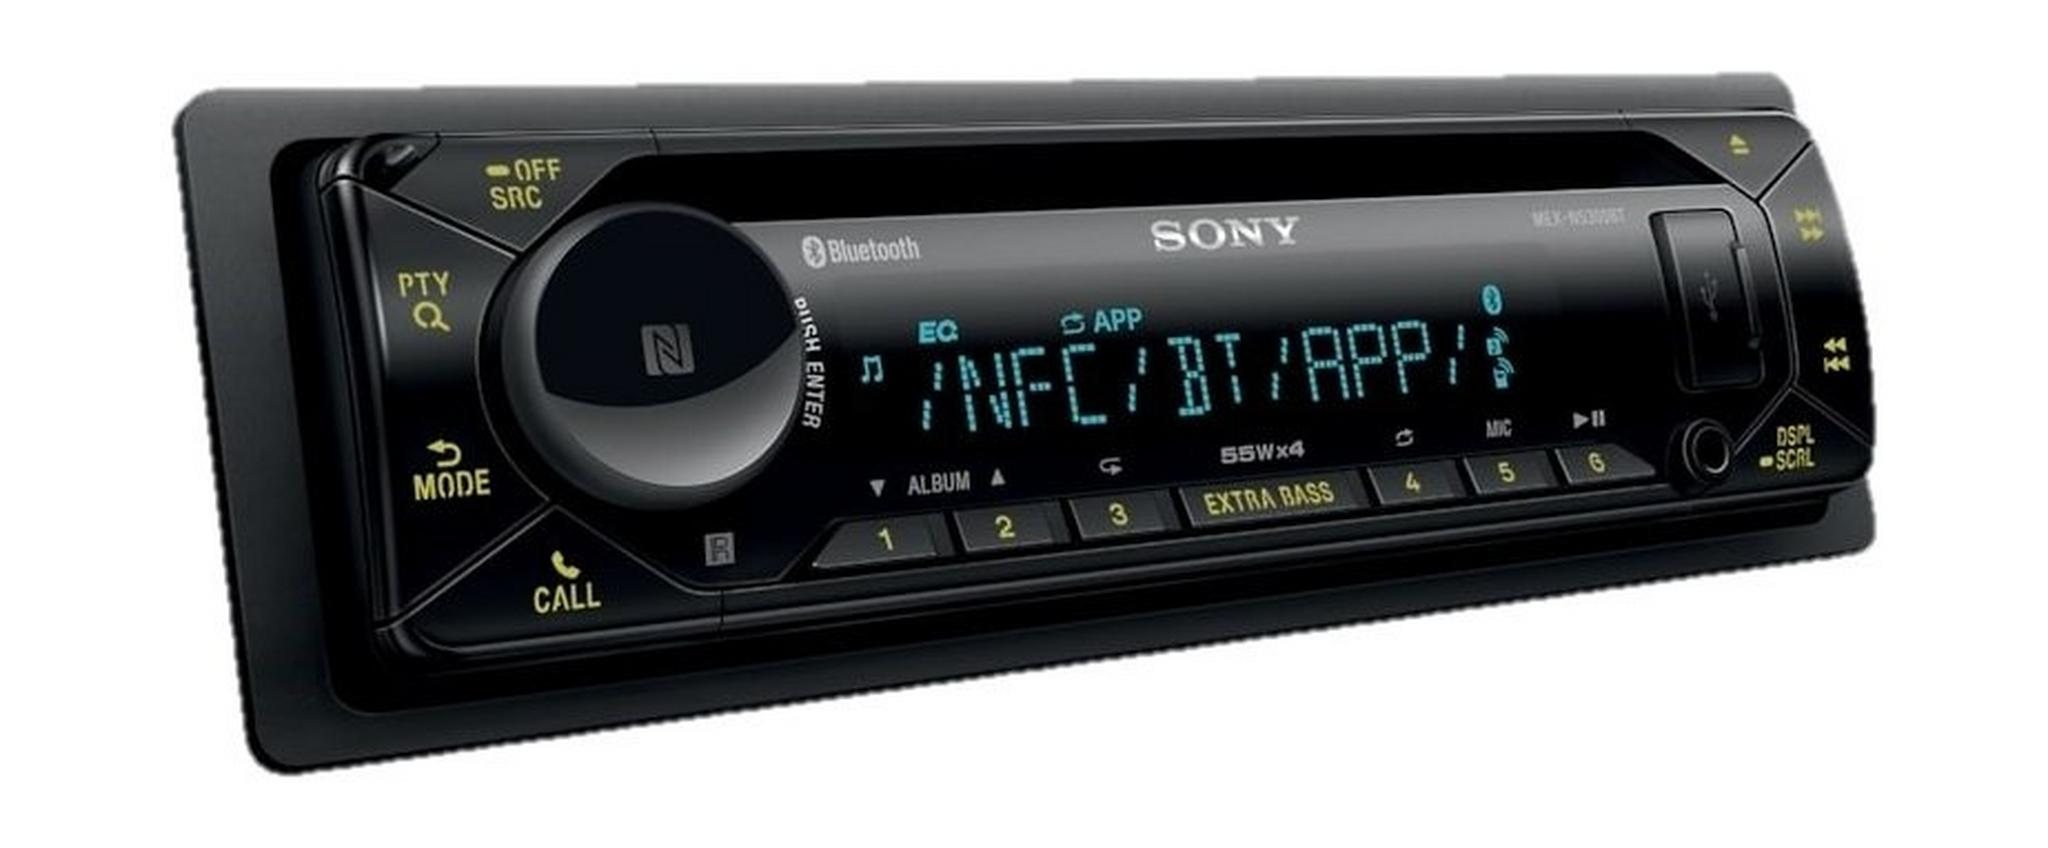 Sony CD Receiver with BLUETOOTH Technology - MEX-N5300BT